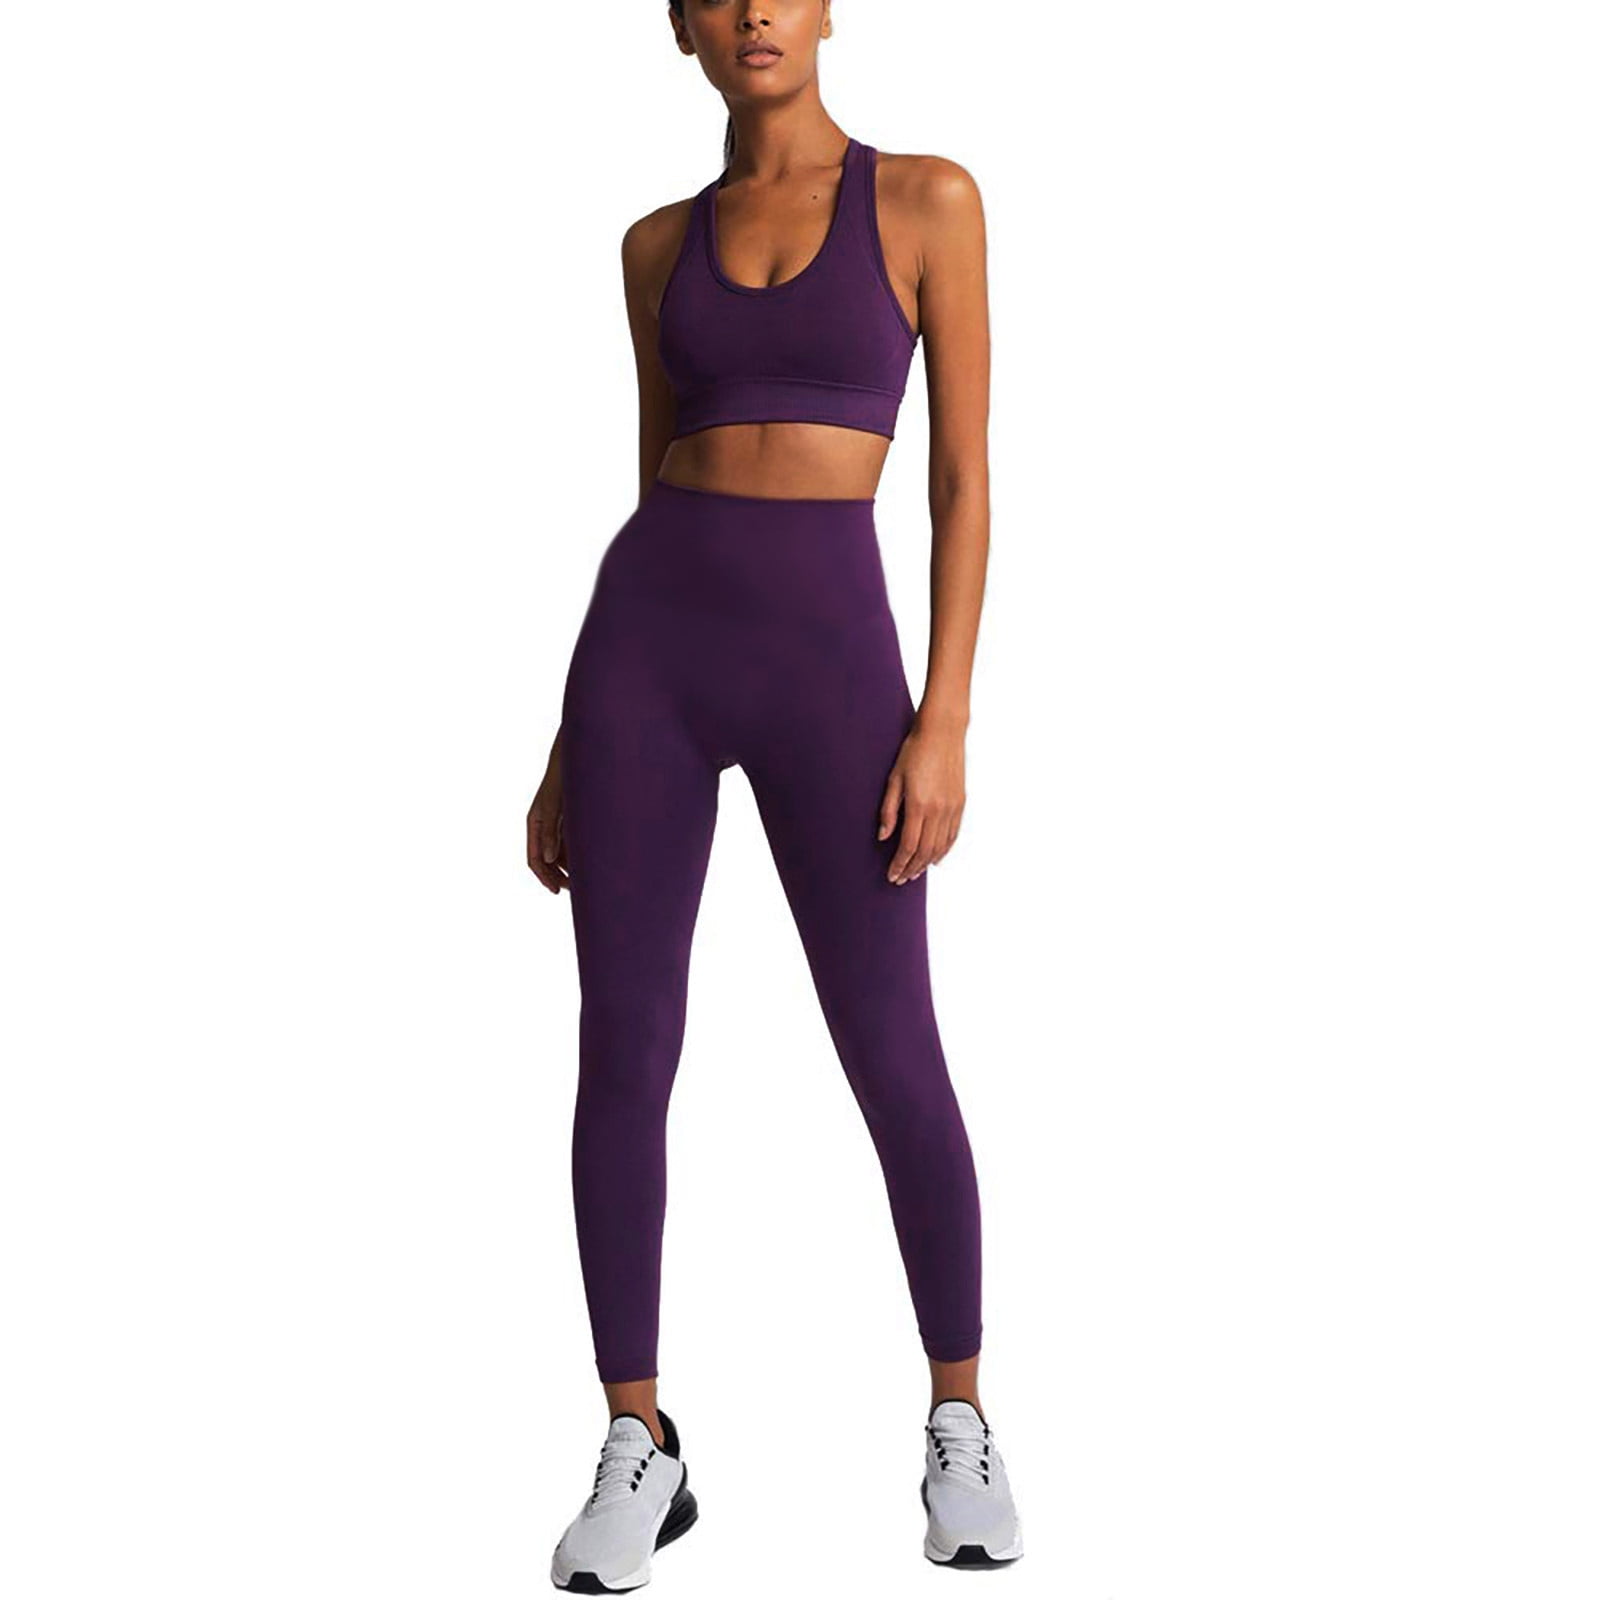 Podplug Work Out Sets Gym for Women, Women's Workout Outfits 2